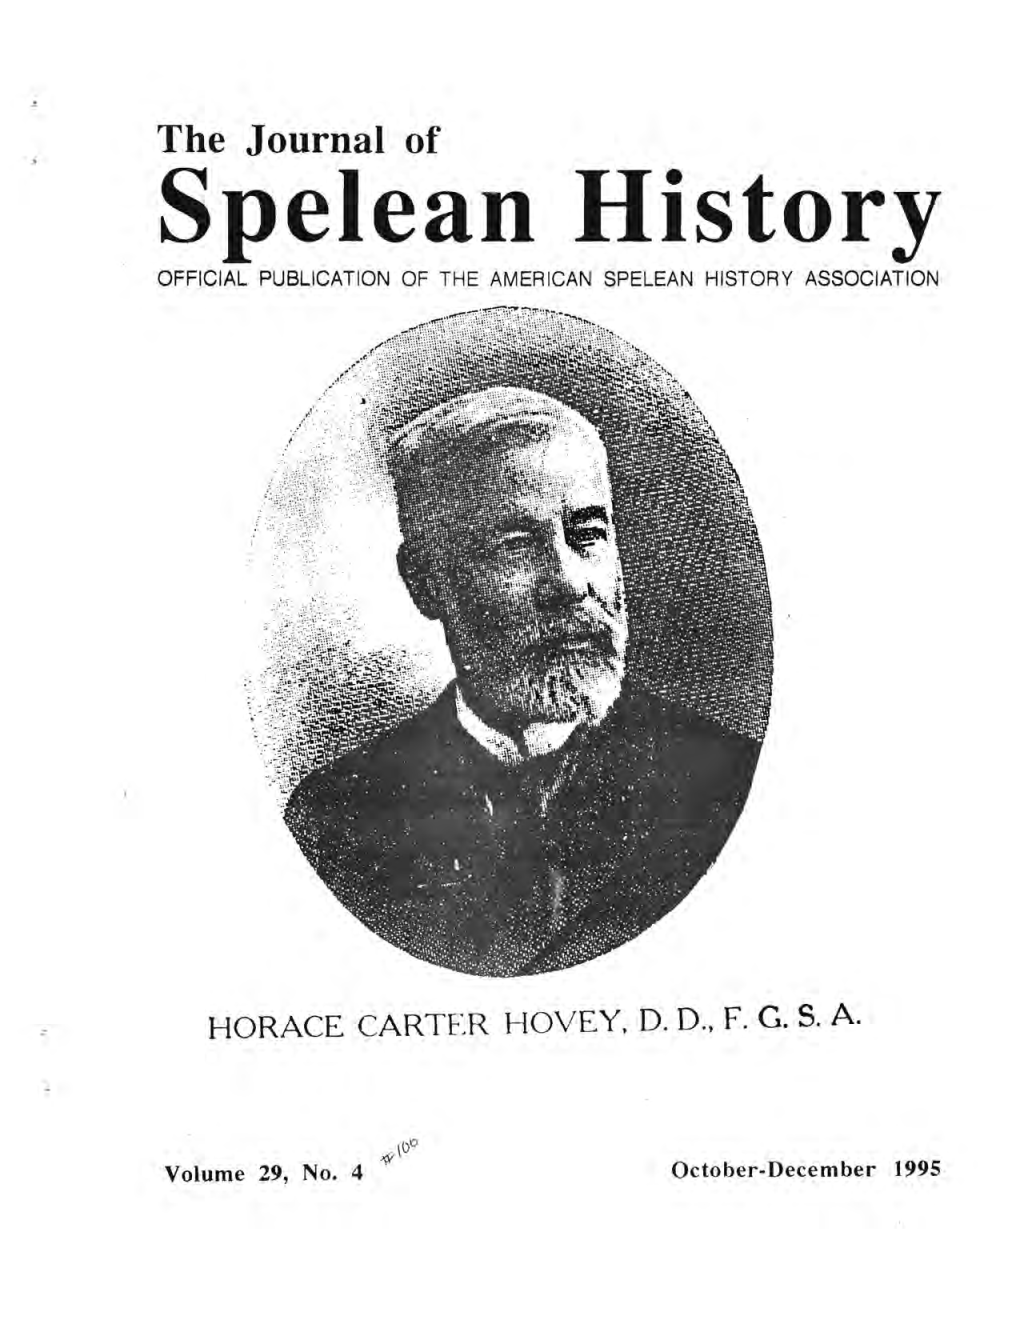 Spelean History OFFICIAL PUBLICATION of the AMERICAN SPELEAN HISTORY ASSOCIATION